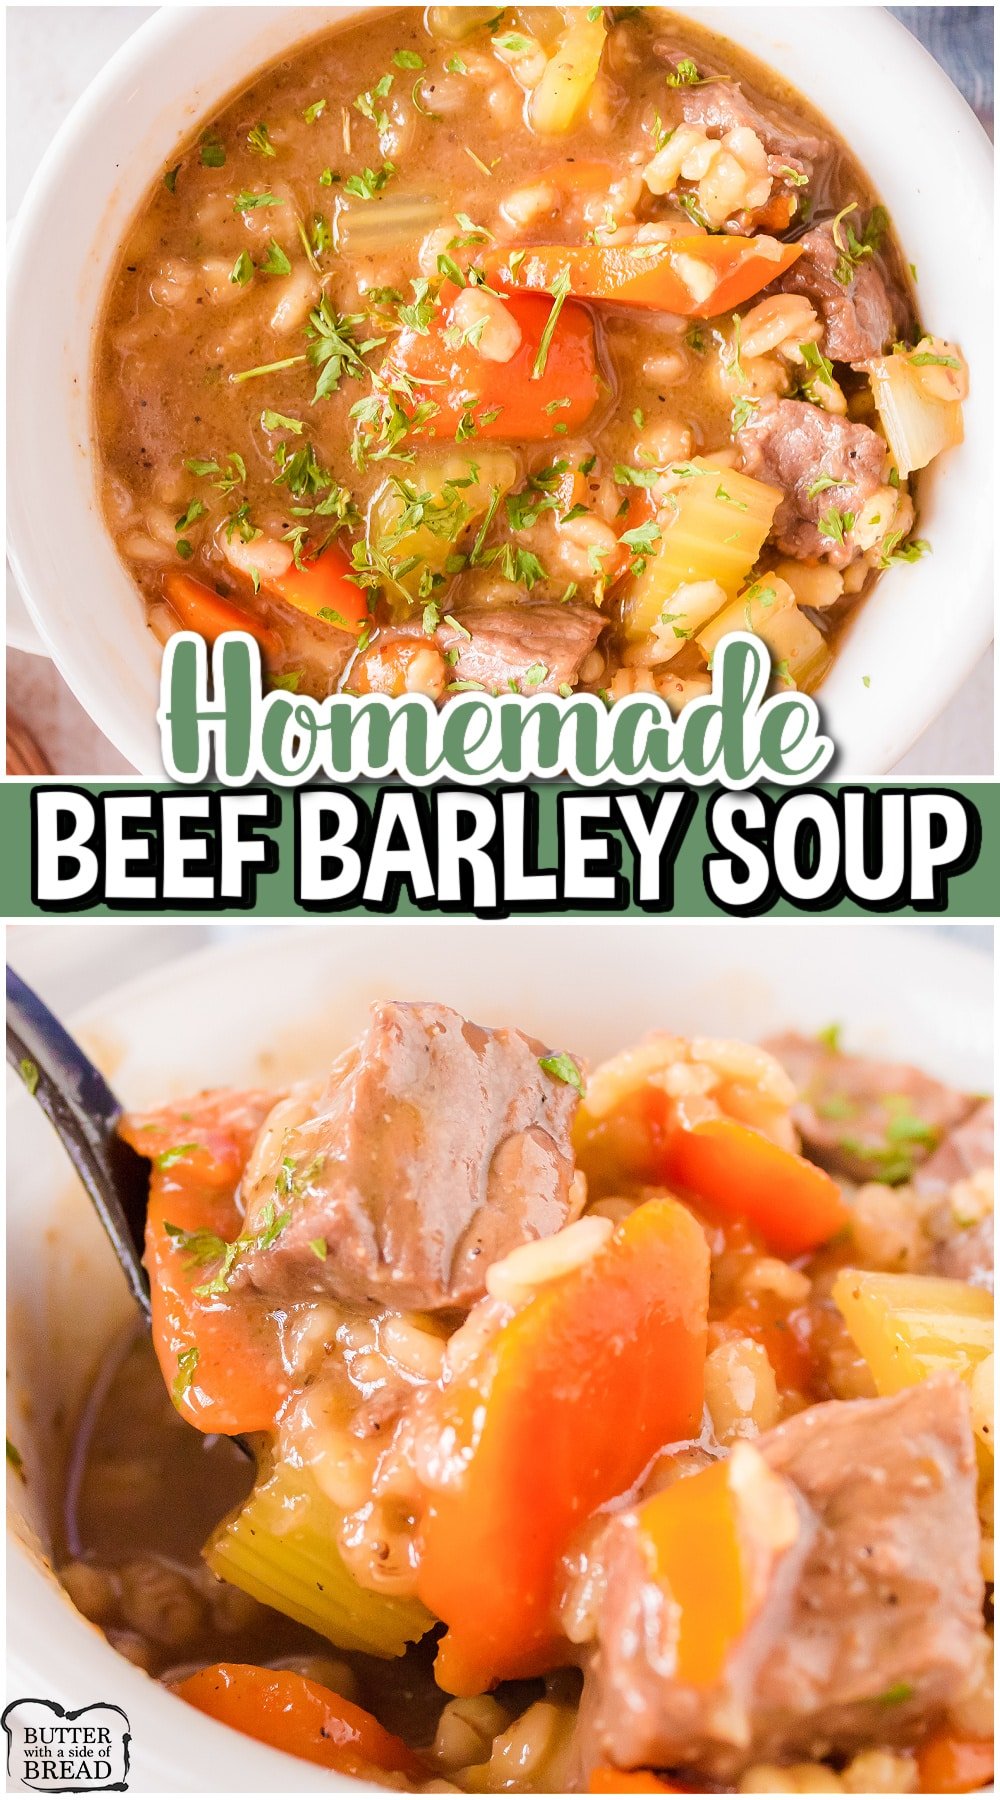 Homemade Beef Barley Soup is a rich, flavorful soup made with barley pearls, fresh veggies & tender beef. This beef and barley soup perfect for cold winter nights!